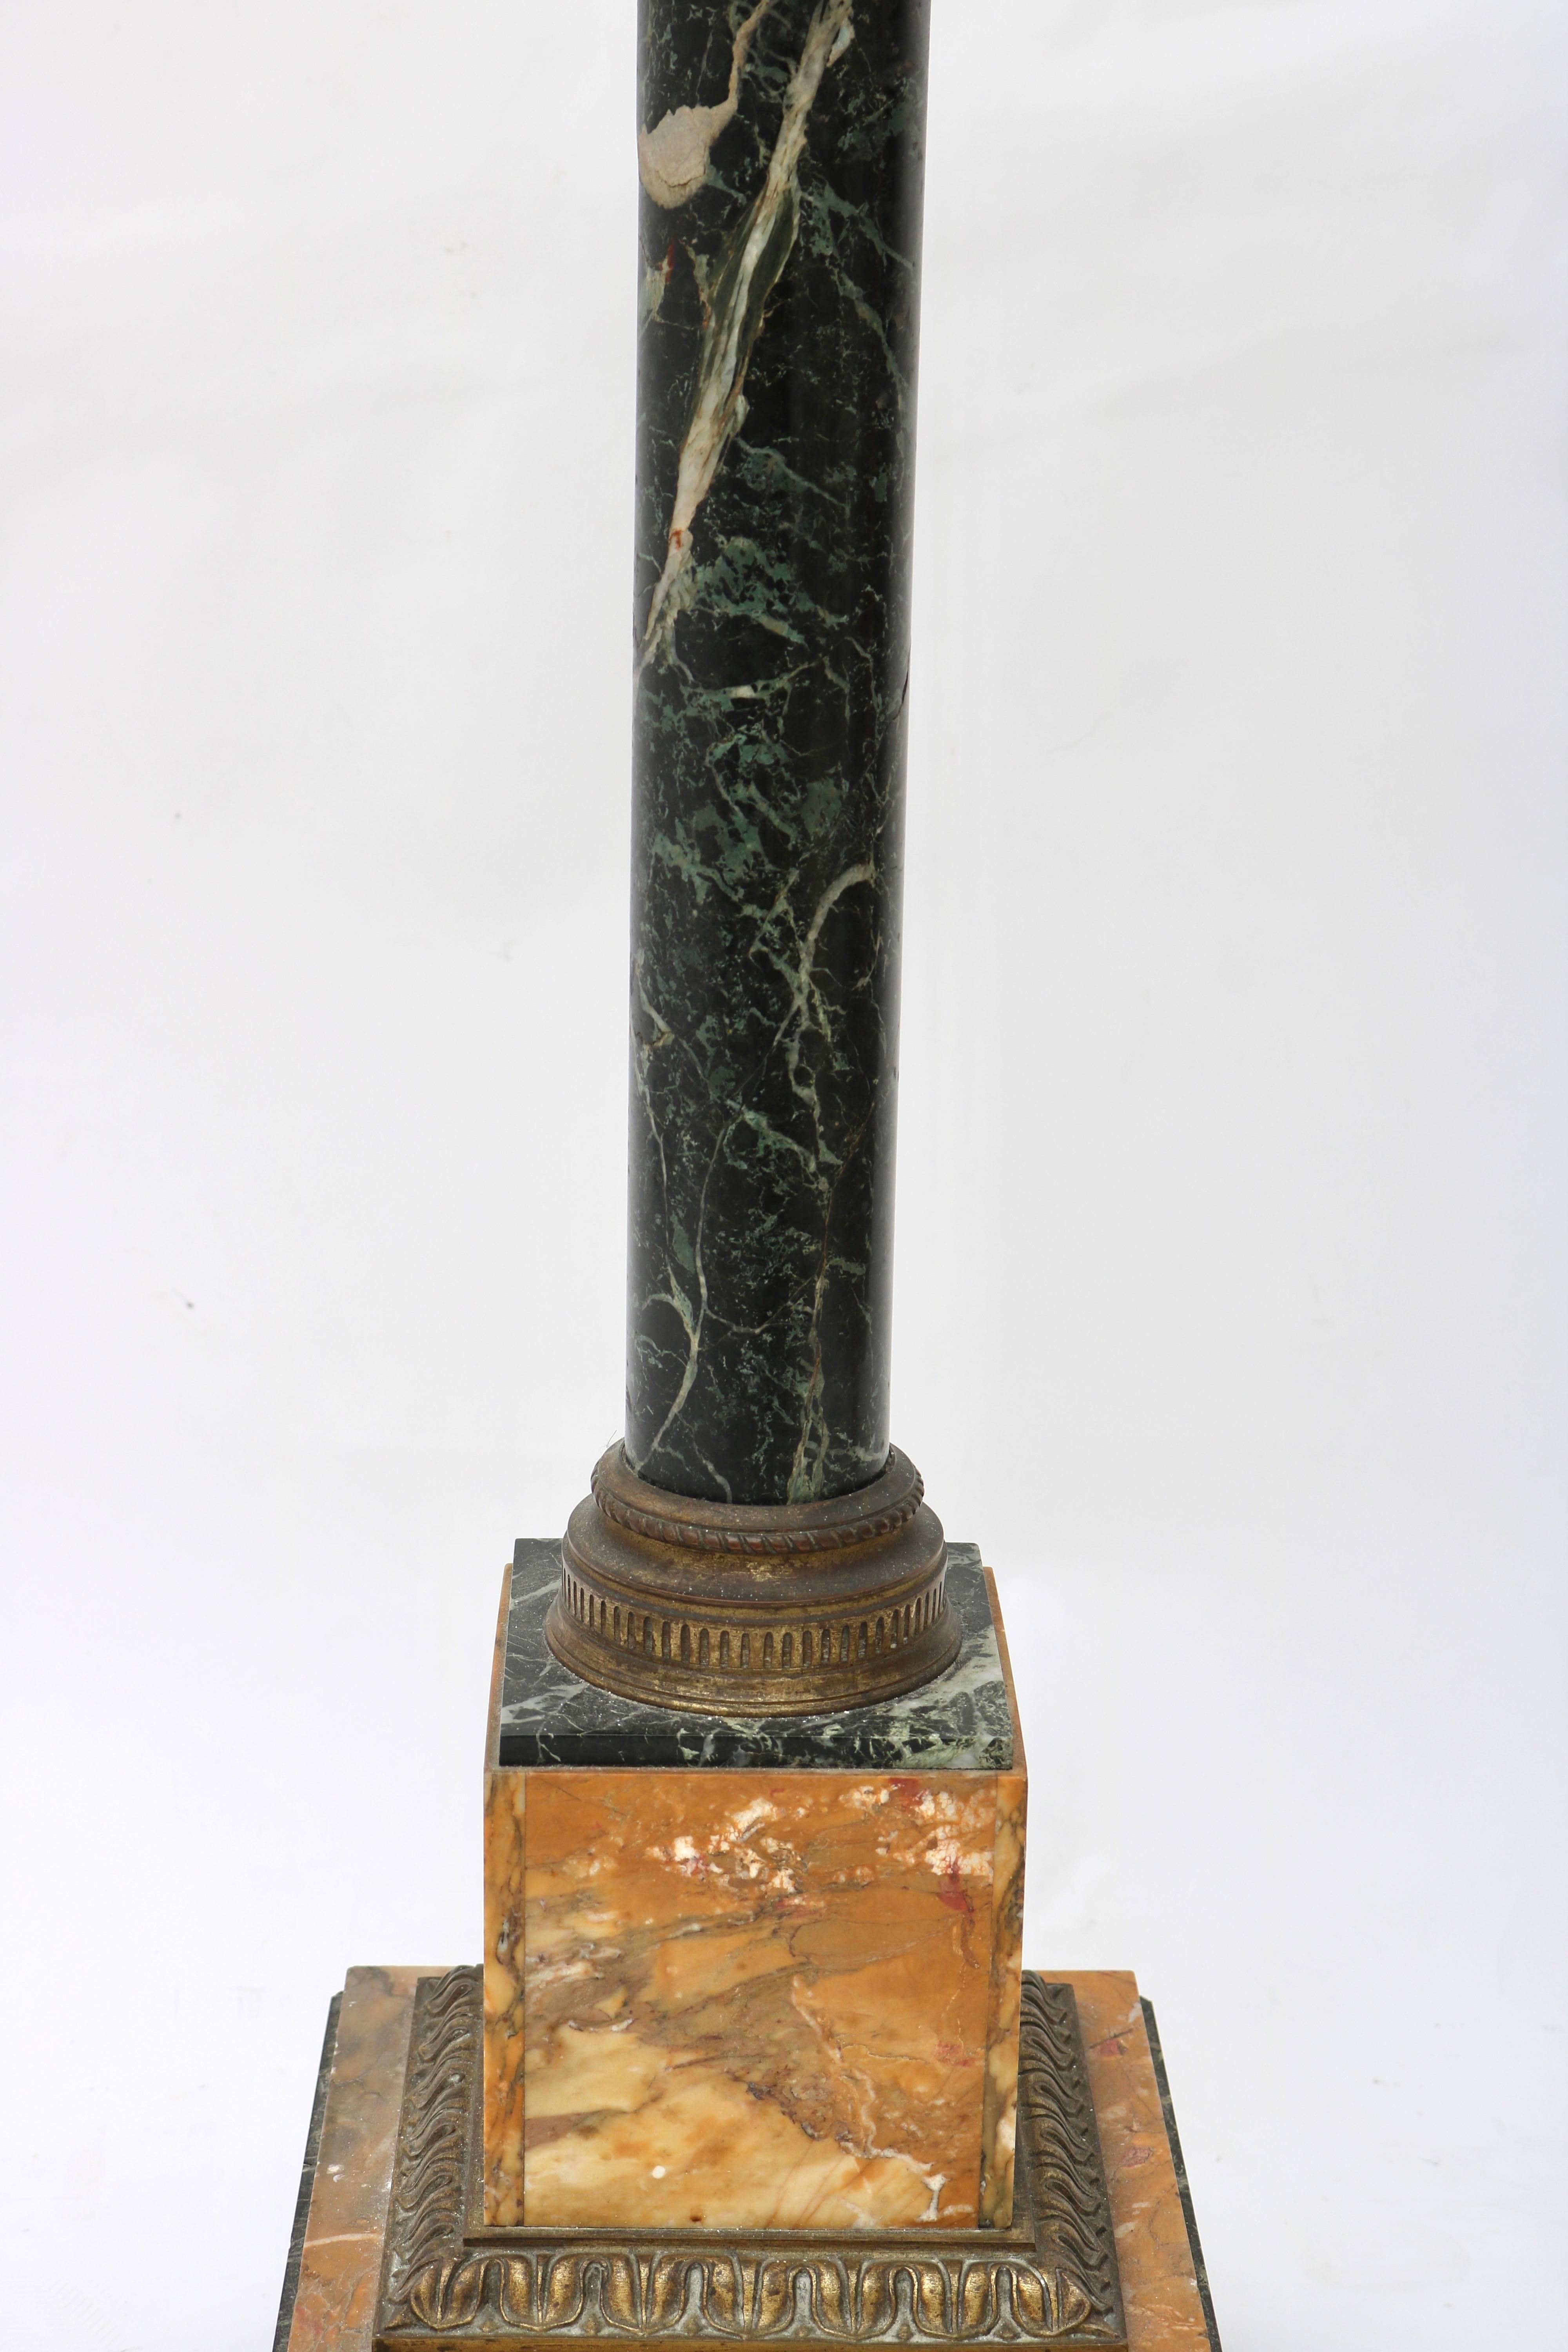 This stylish pedestal dates from the late 19th century and is fabricated with a Verdi green and golden colored marbles with bronze mounts.

For best net trade price or additional questions regarding this item, please click the 